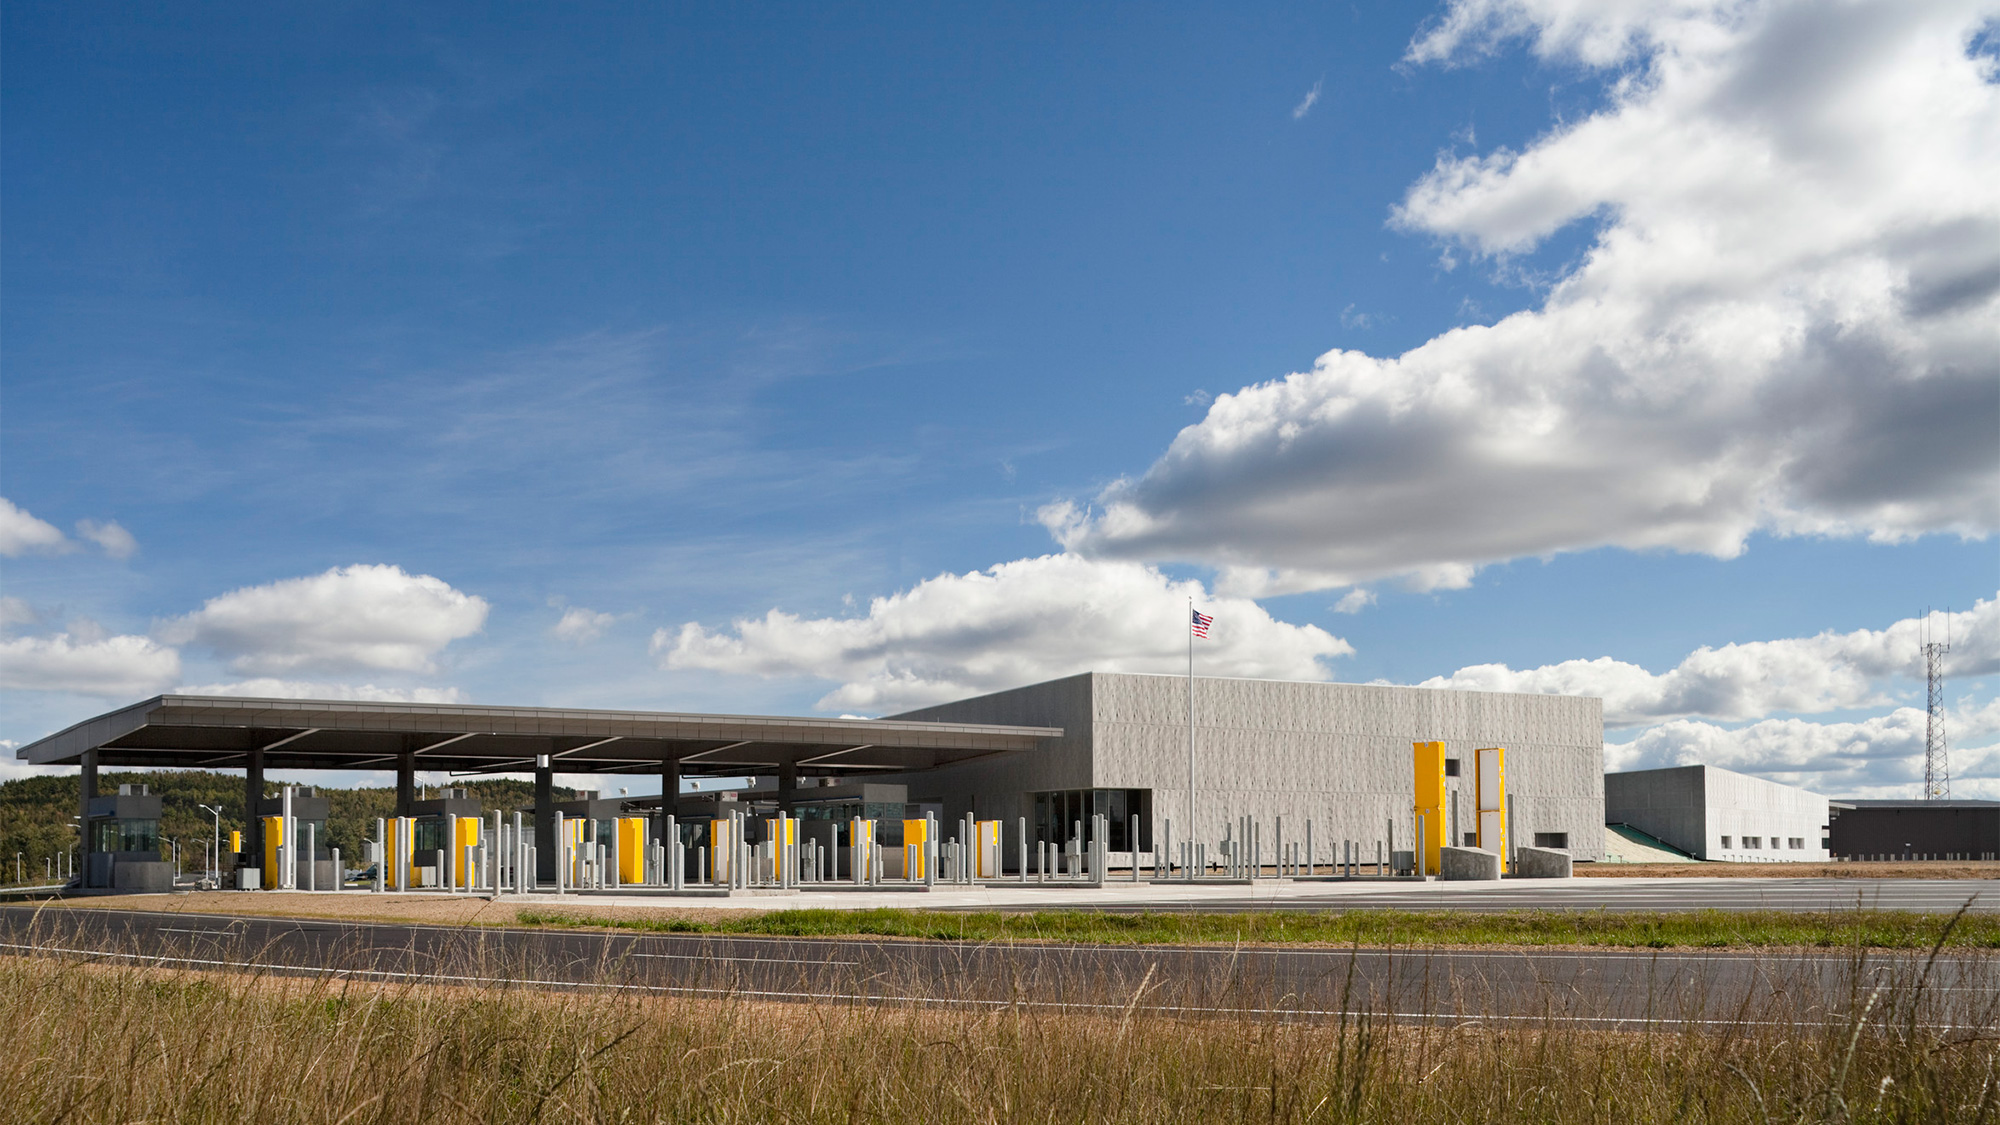 Calais Land Port of Entry in daylight